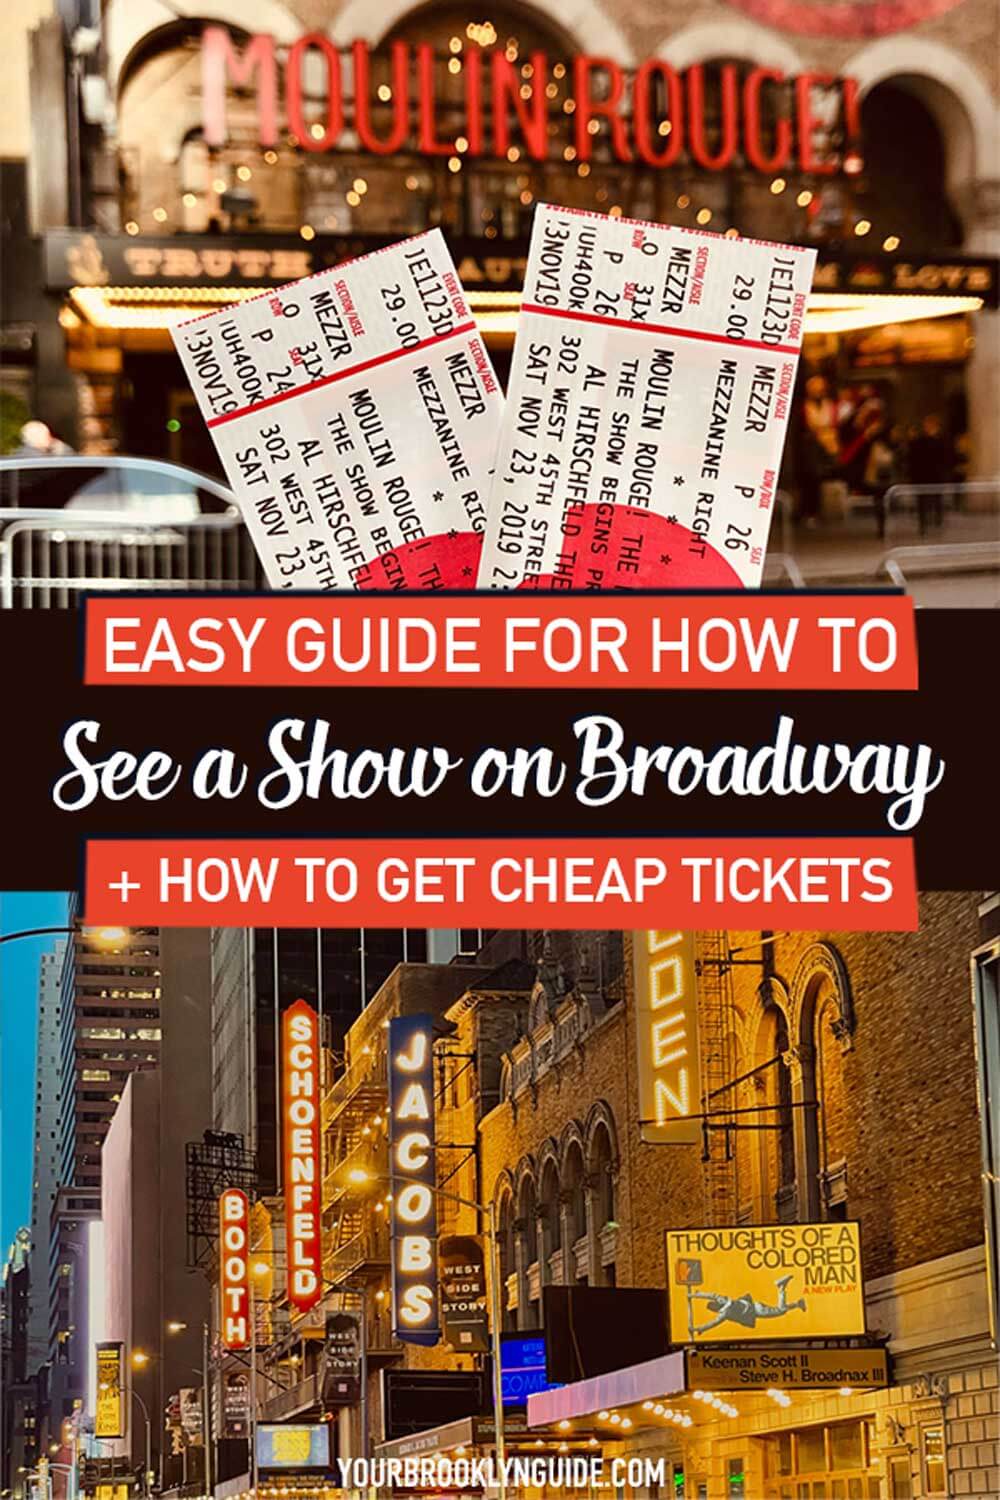 guide-for-how-to-see-a-show-on-broadway